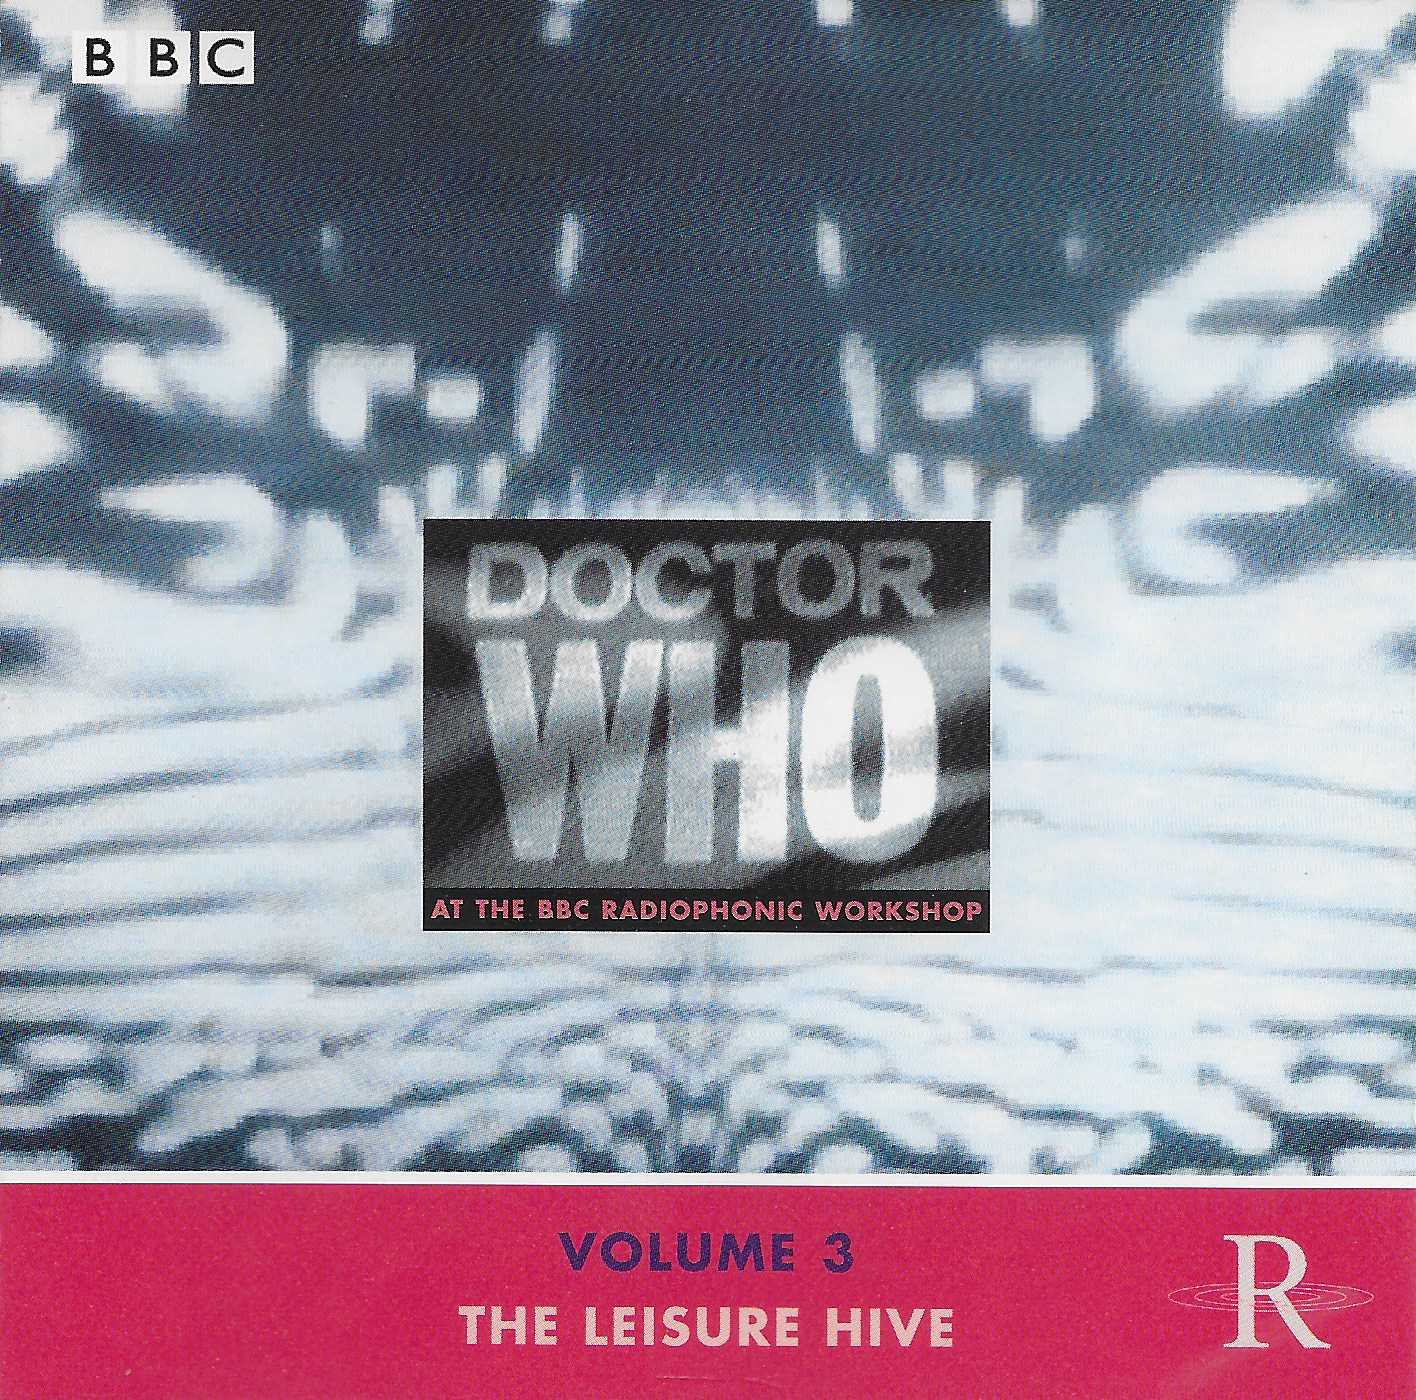 Picture of Doctor Who - At the radiophonic workshop - Volume 3 - The Leisure Hive by artist Peter Howell / Dick Mills / Delia Derbyshire / Ron Grainer from the BBC cds - Records and Tapes library